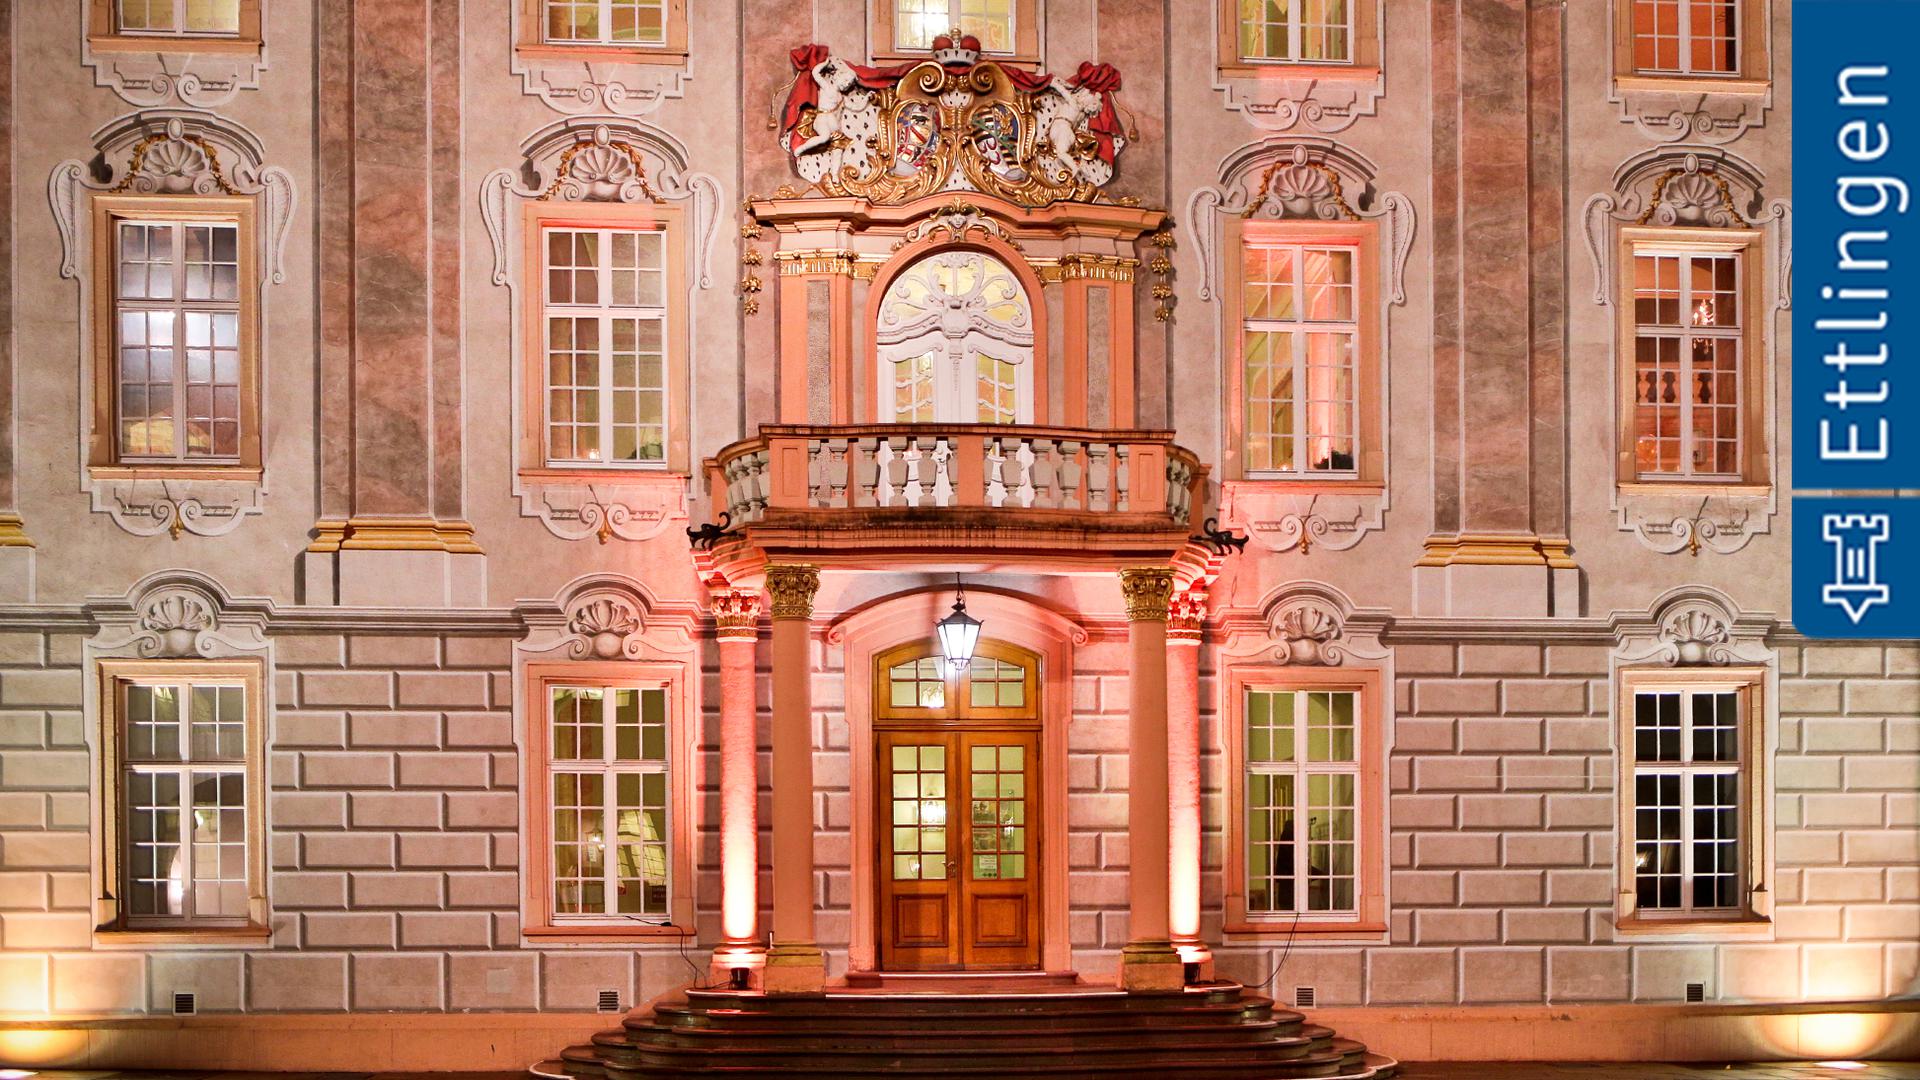 Ettlingen Castle creates an exceptional setting for events of all kinds.